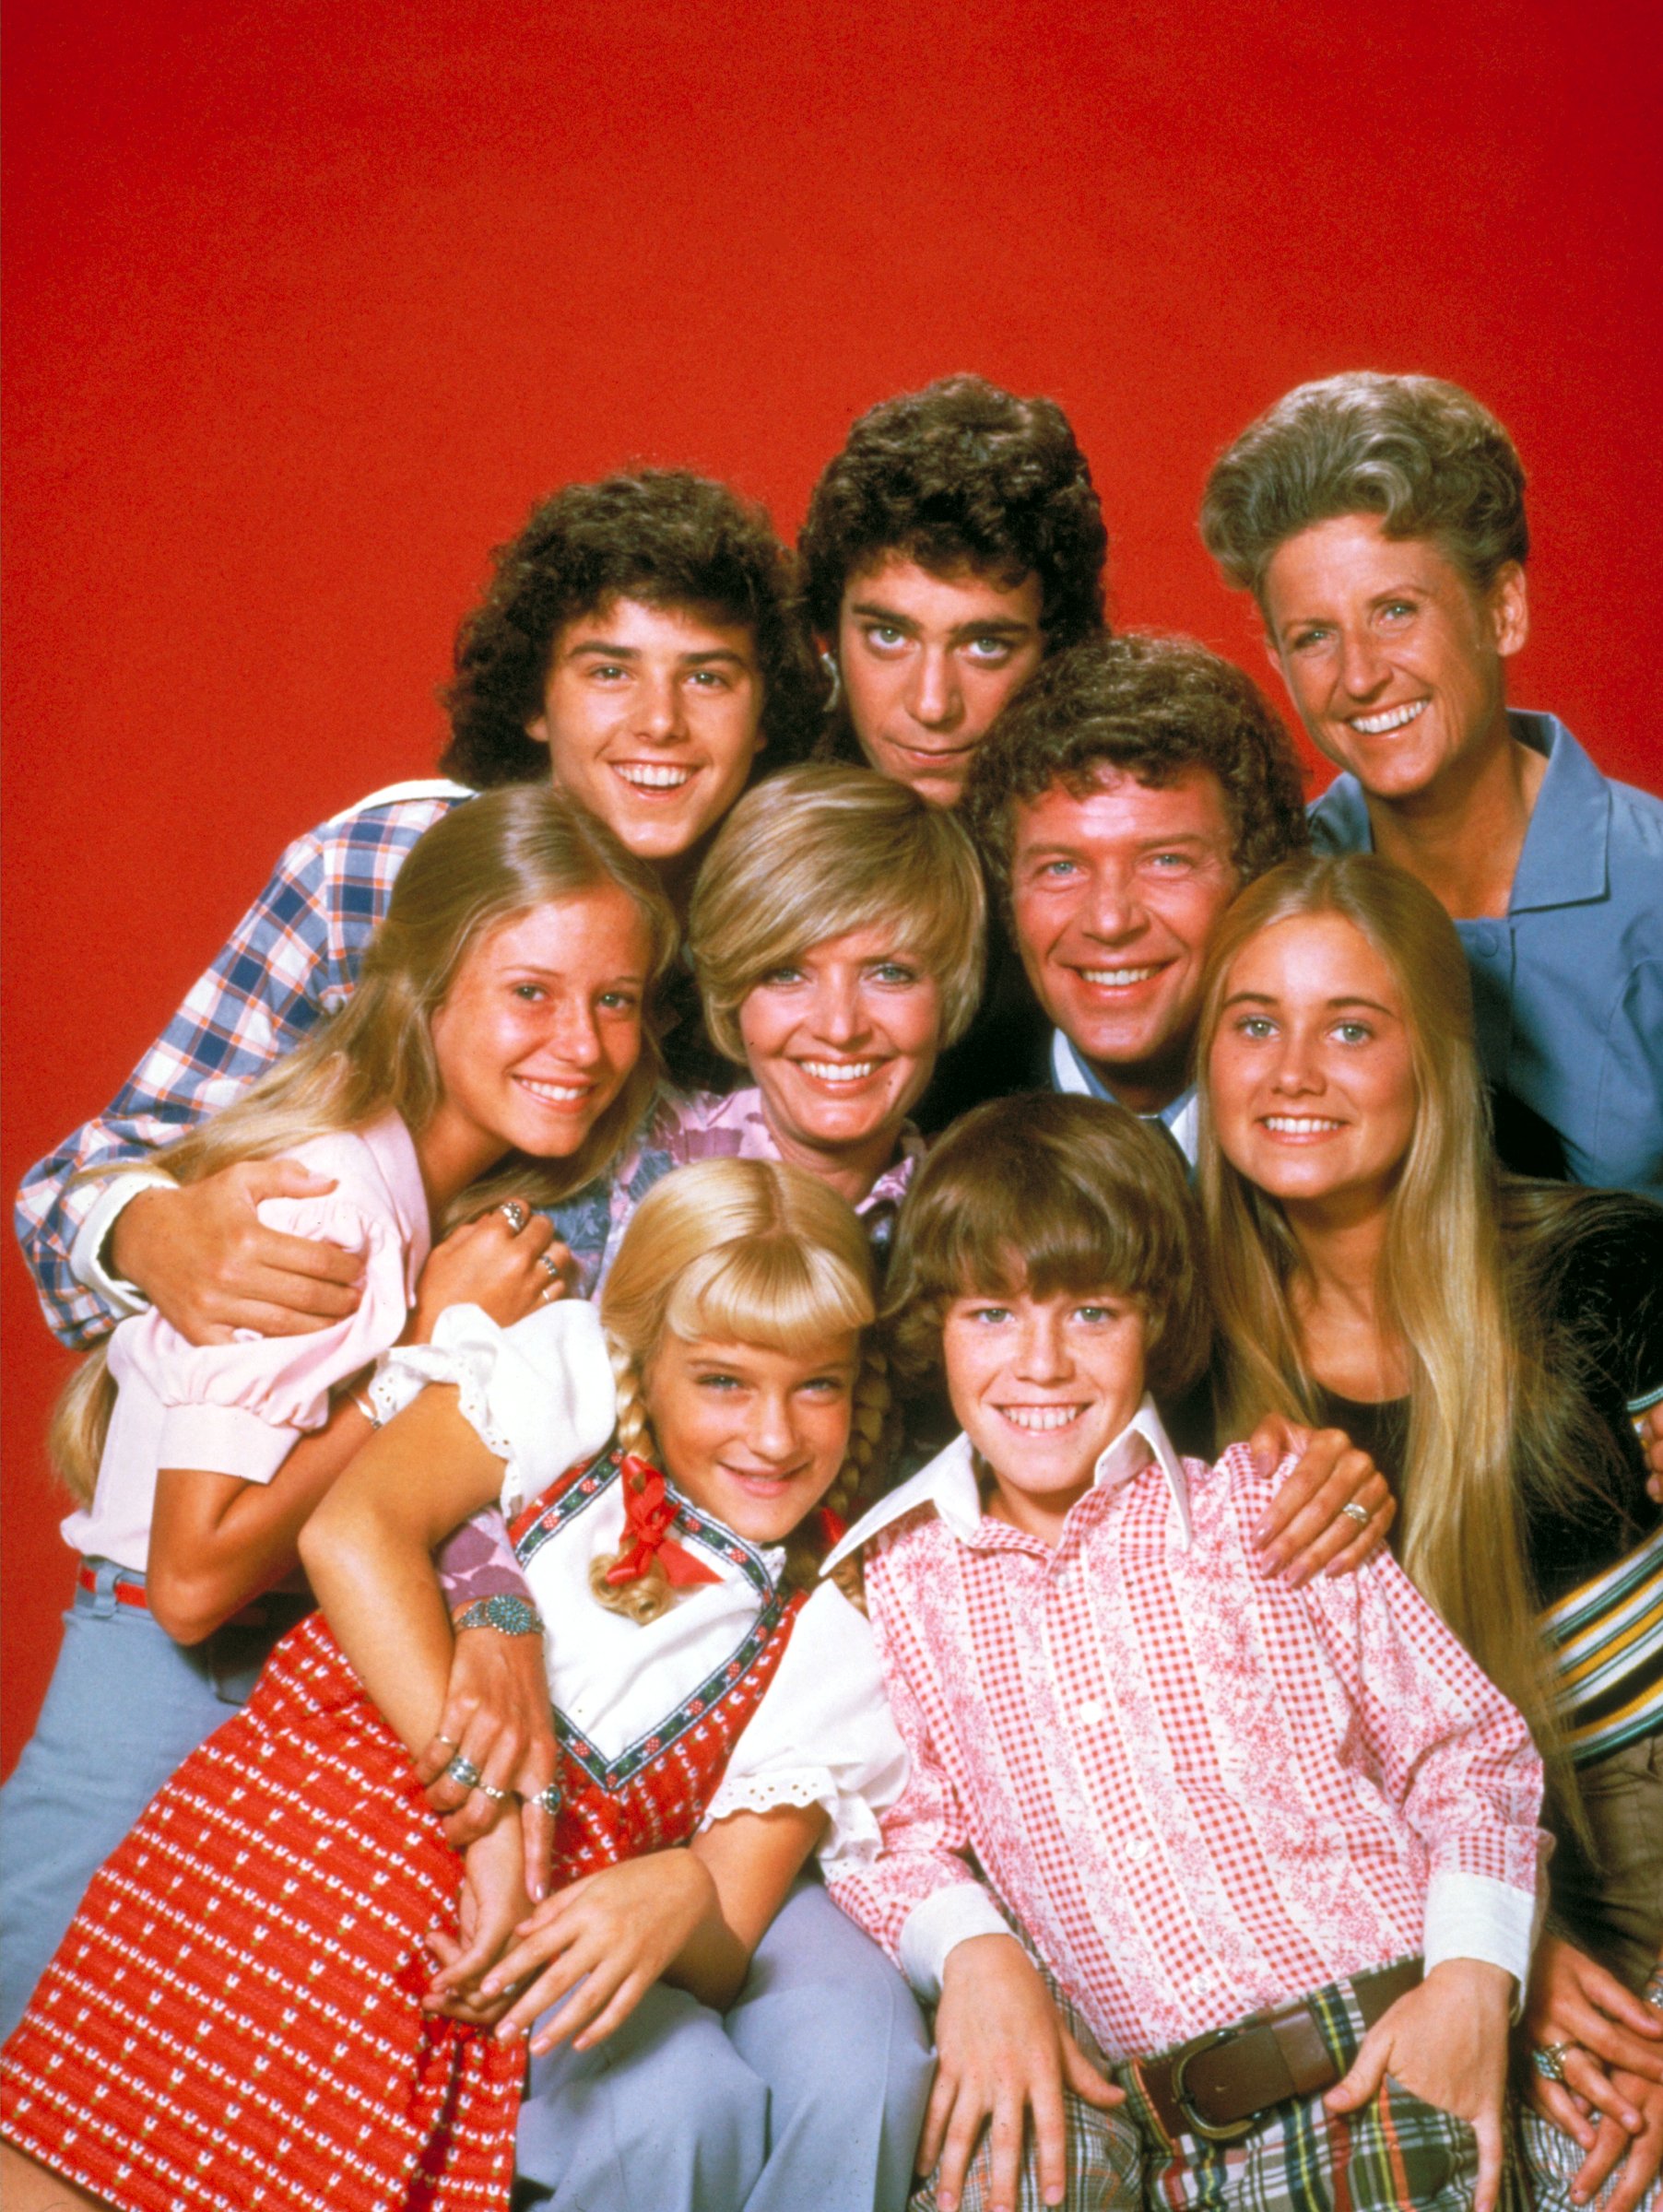 Barry Williams and the cast crew of "The Brady Bunch" on set of the sitcom in 1970 | Source: Getty Images